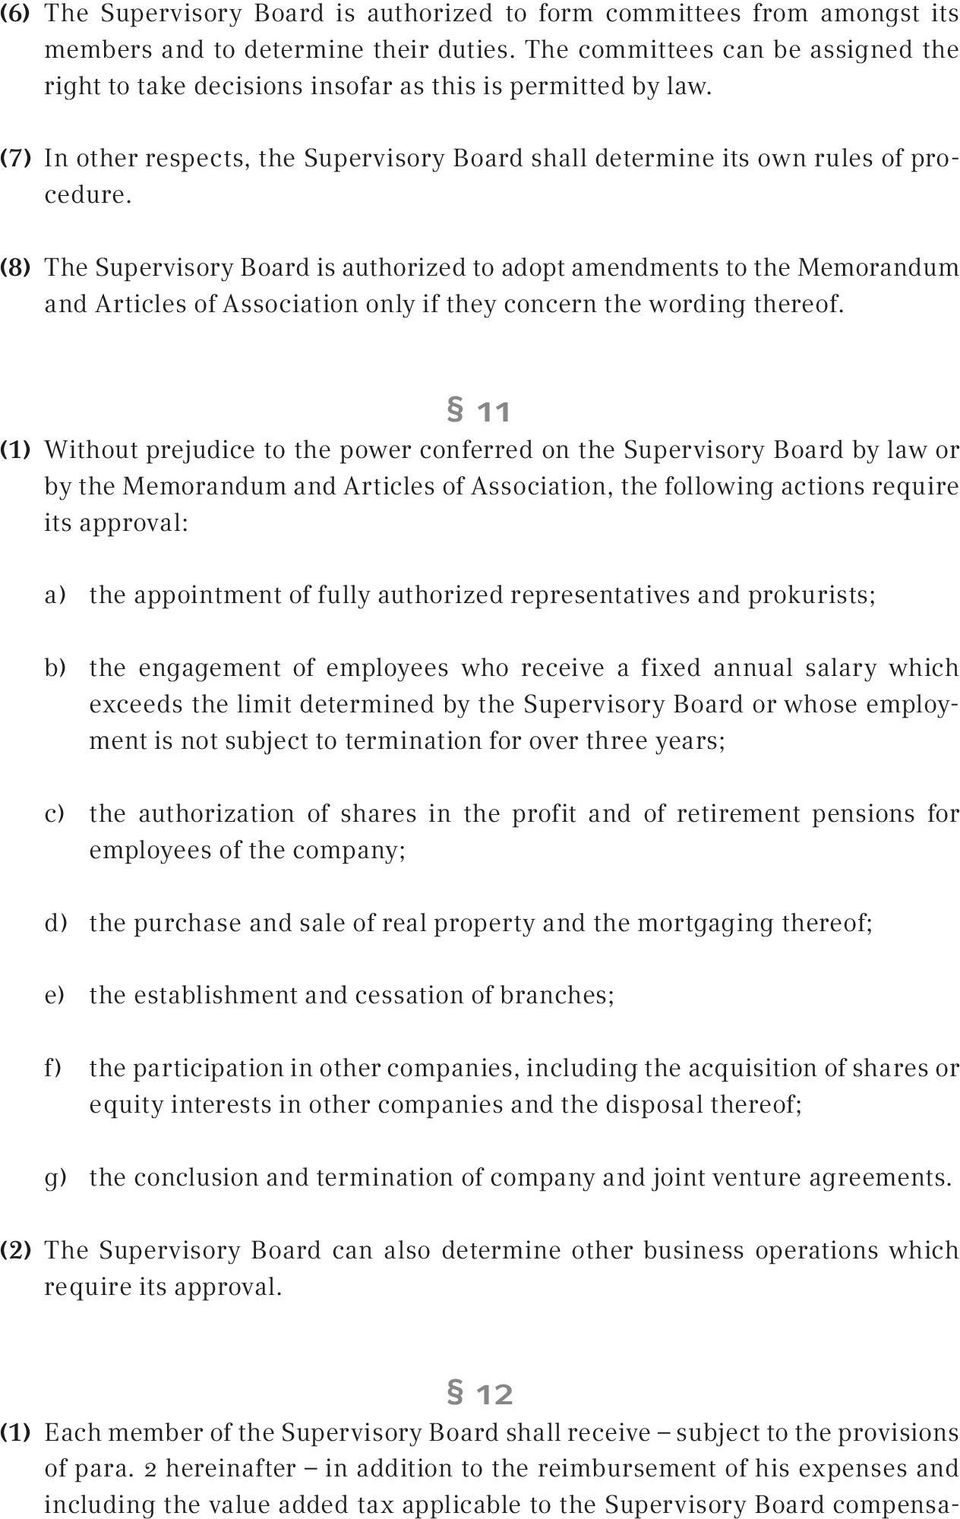 (8) The Supervisory Board is authorized to adopt amendments to the Memorandum and Articles of Association only if they concern the wording thereof.